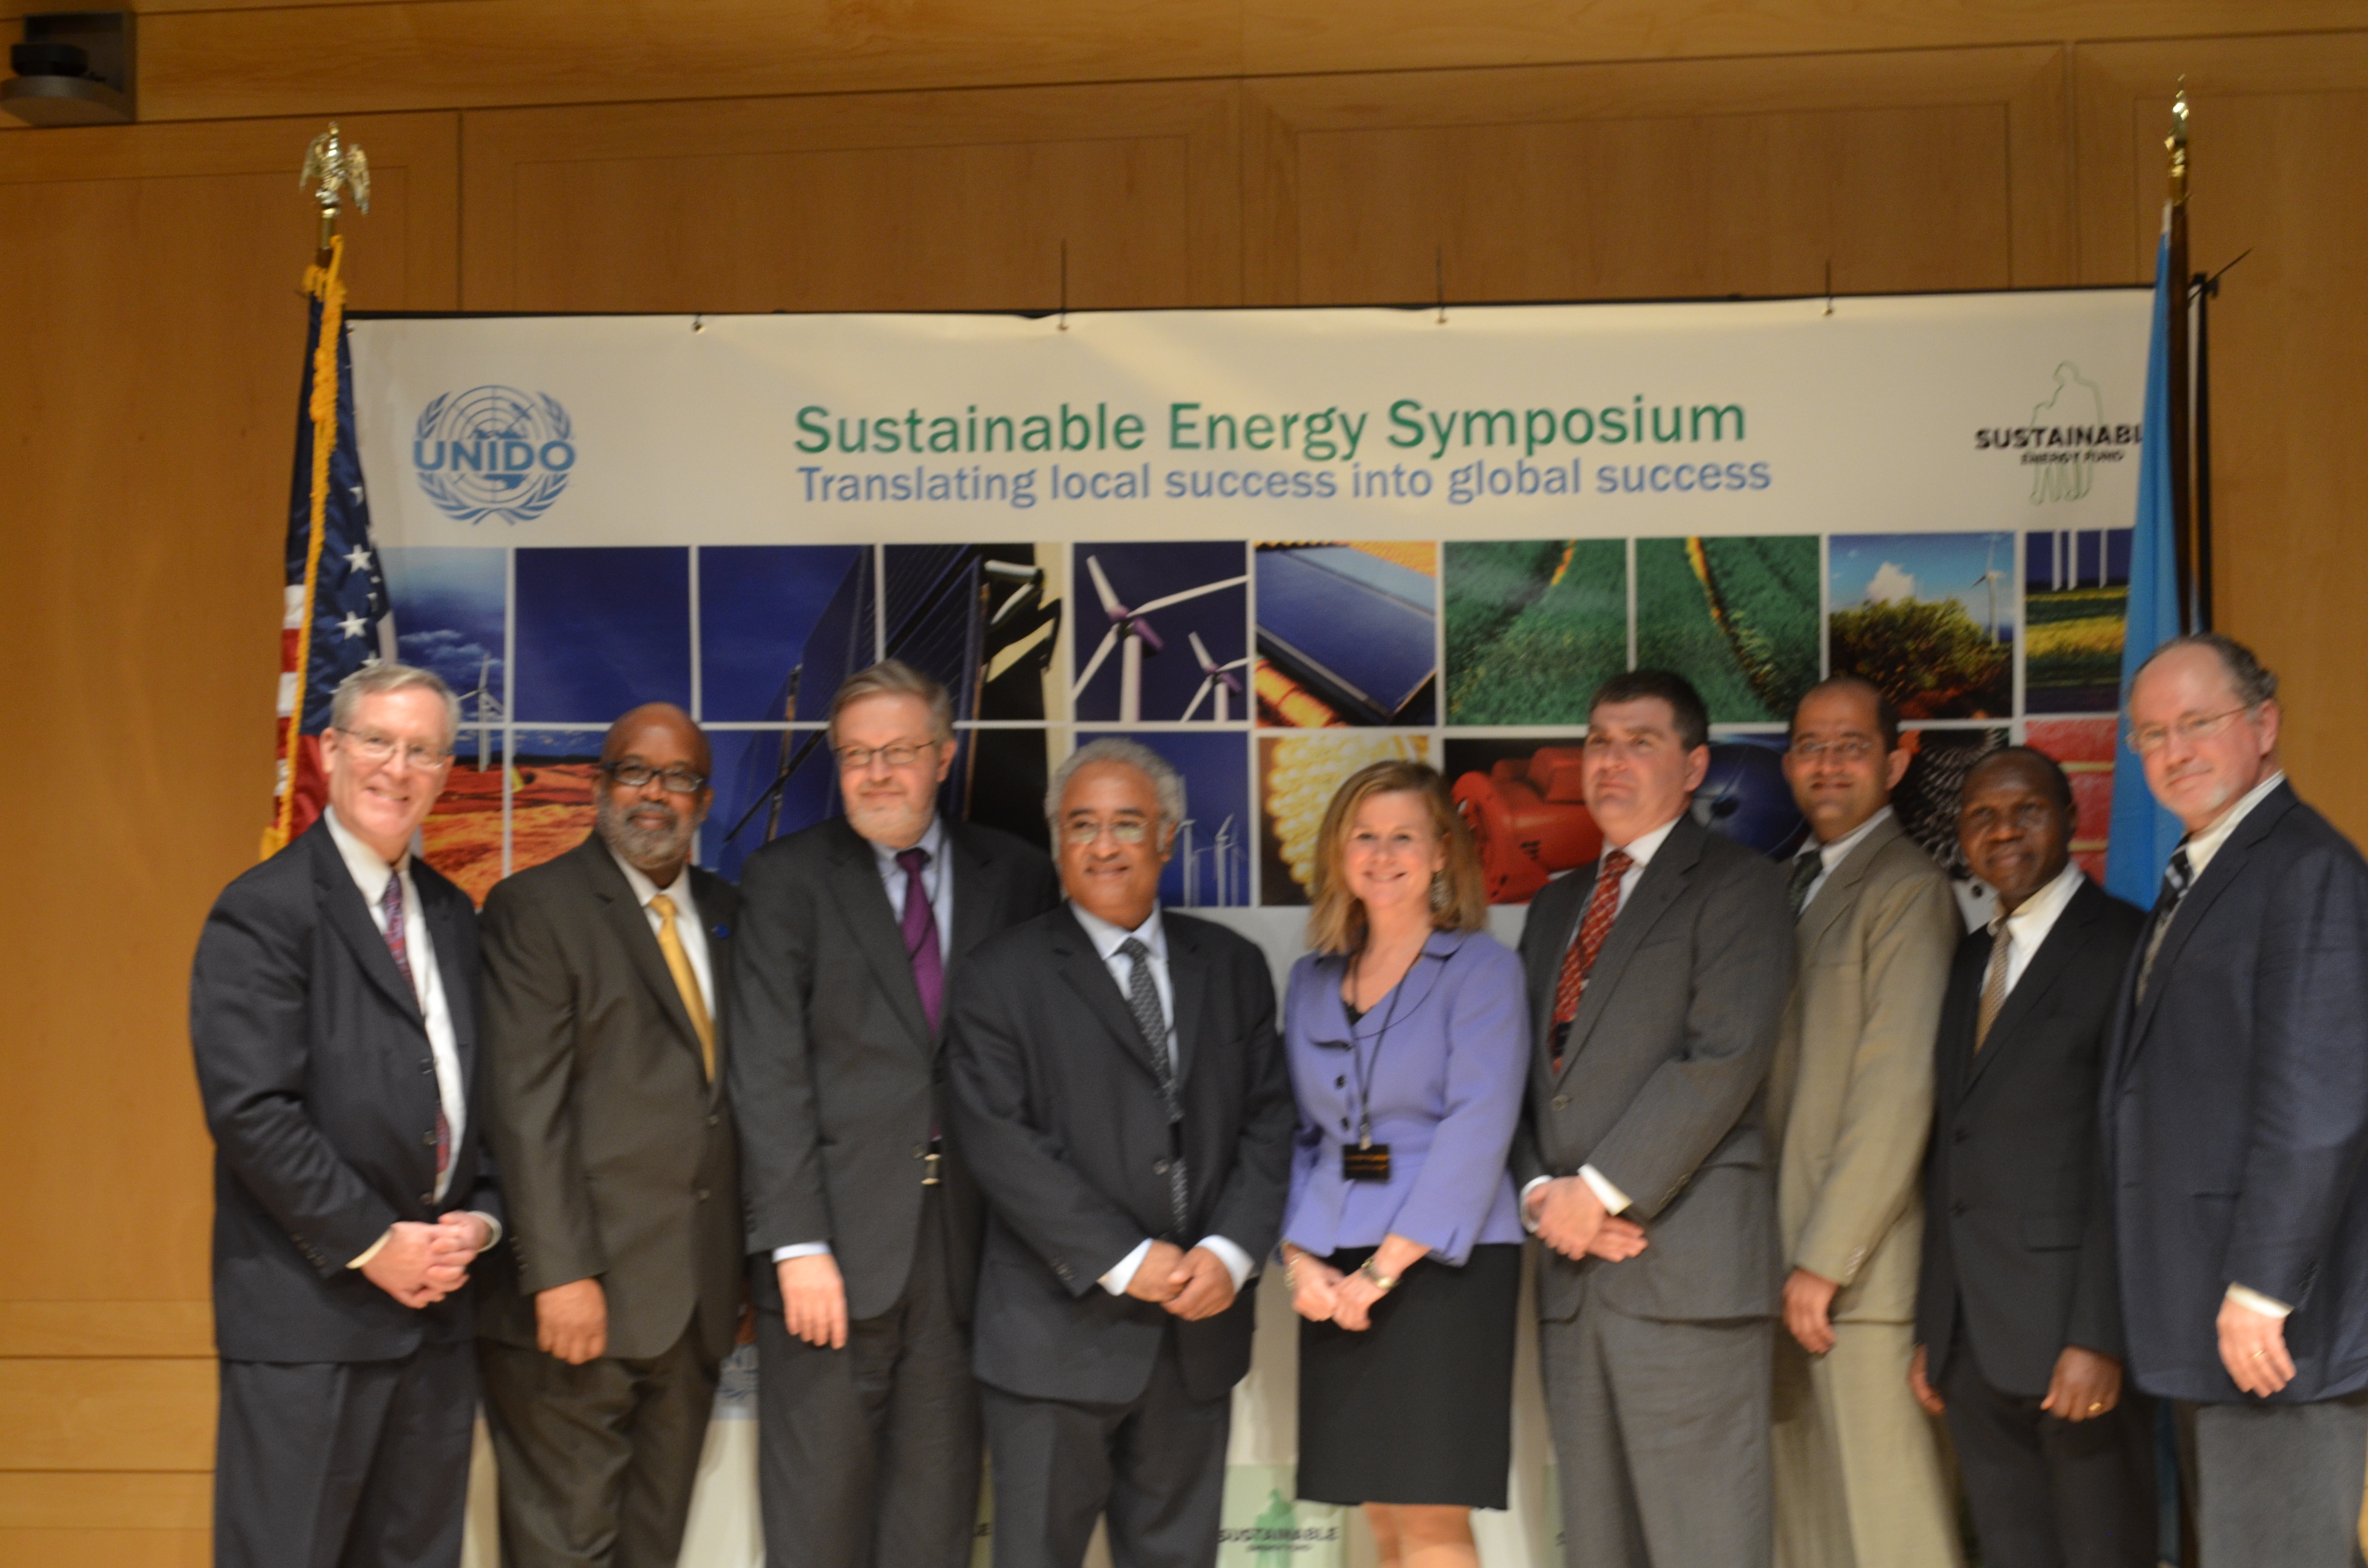 Group of nine people posing in front of a banner at the sustainable energy symposium, featuring images of wind turbines and solar panels.